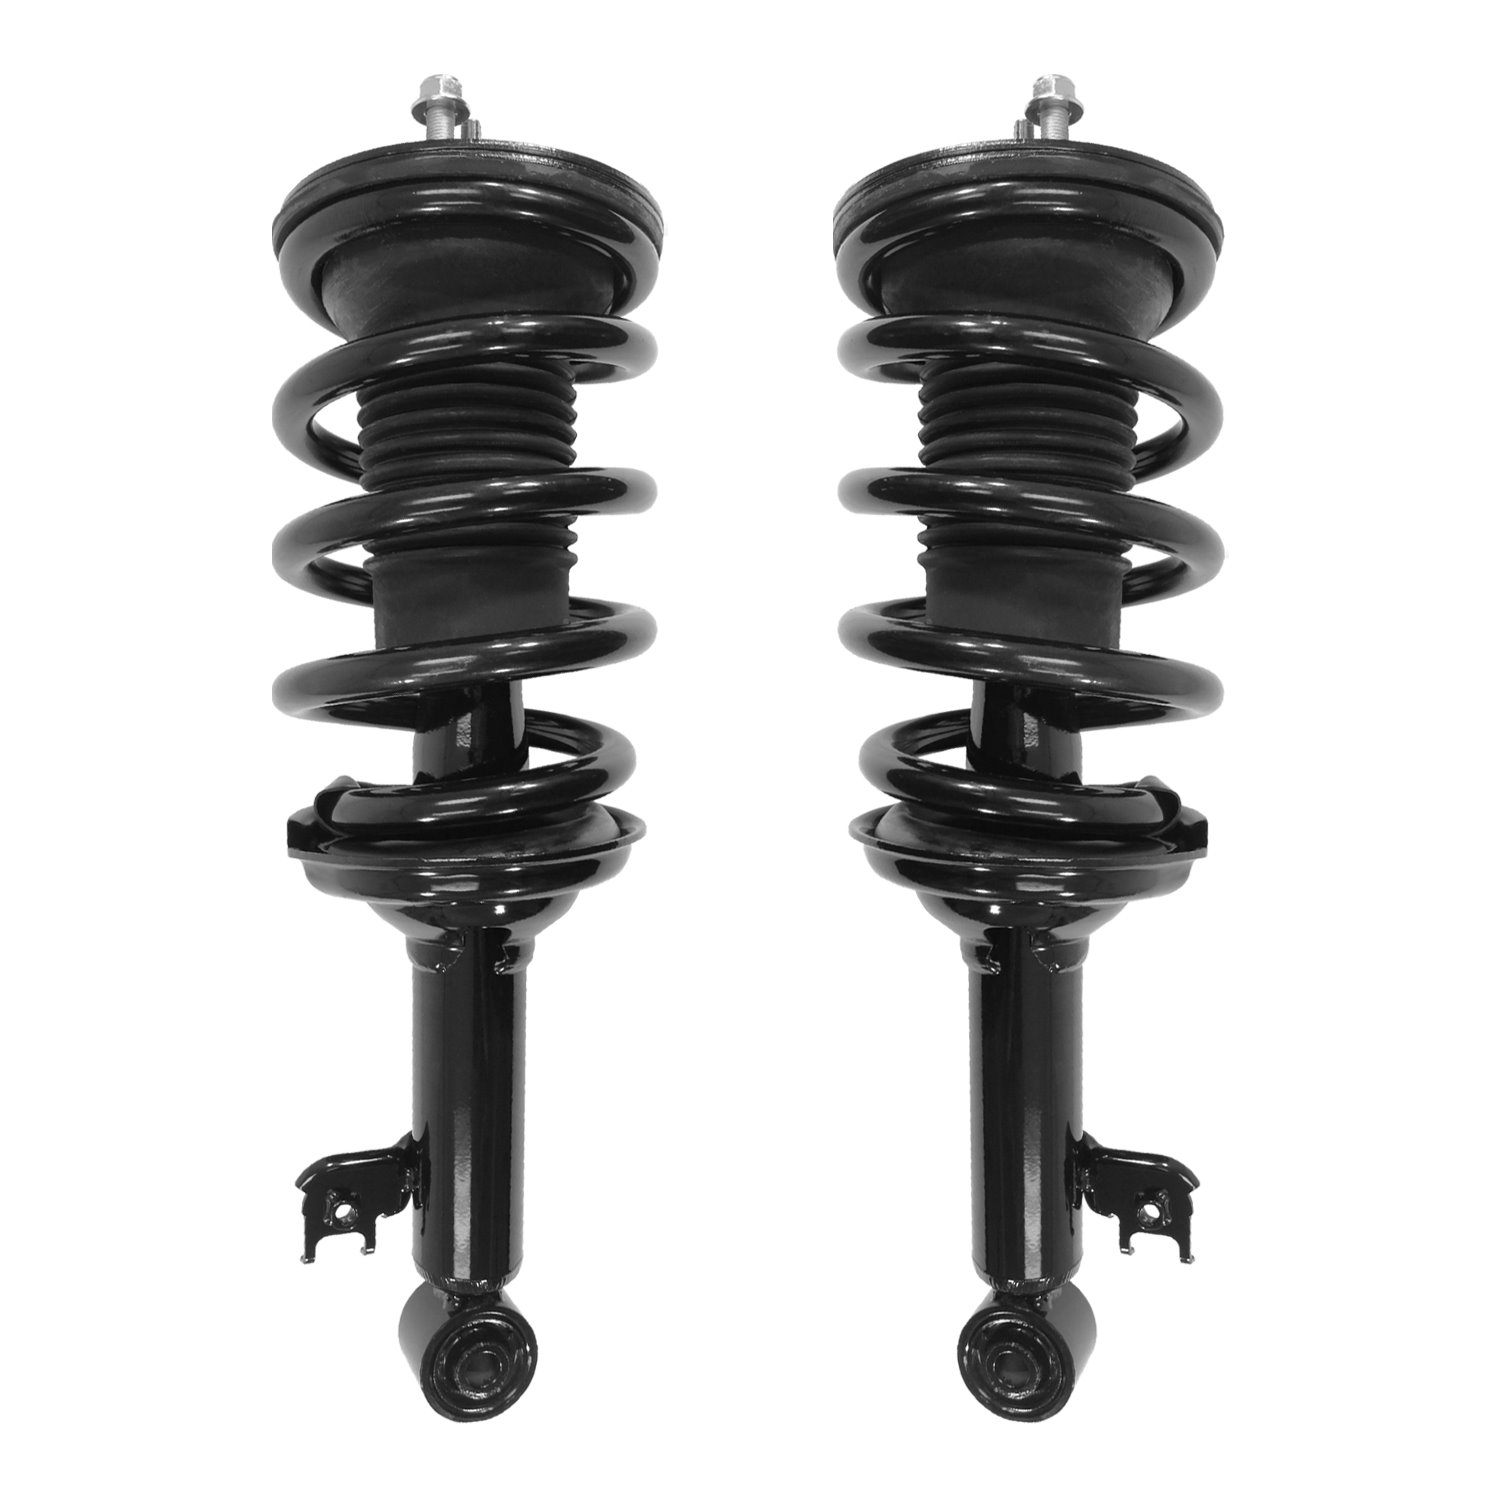 2-11567-11568-001 Suspension Strut & Coil Spring Assembly Set Fits Select Toyota Tacoma